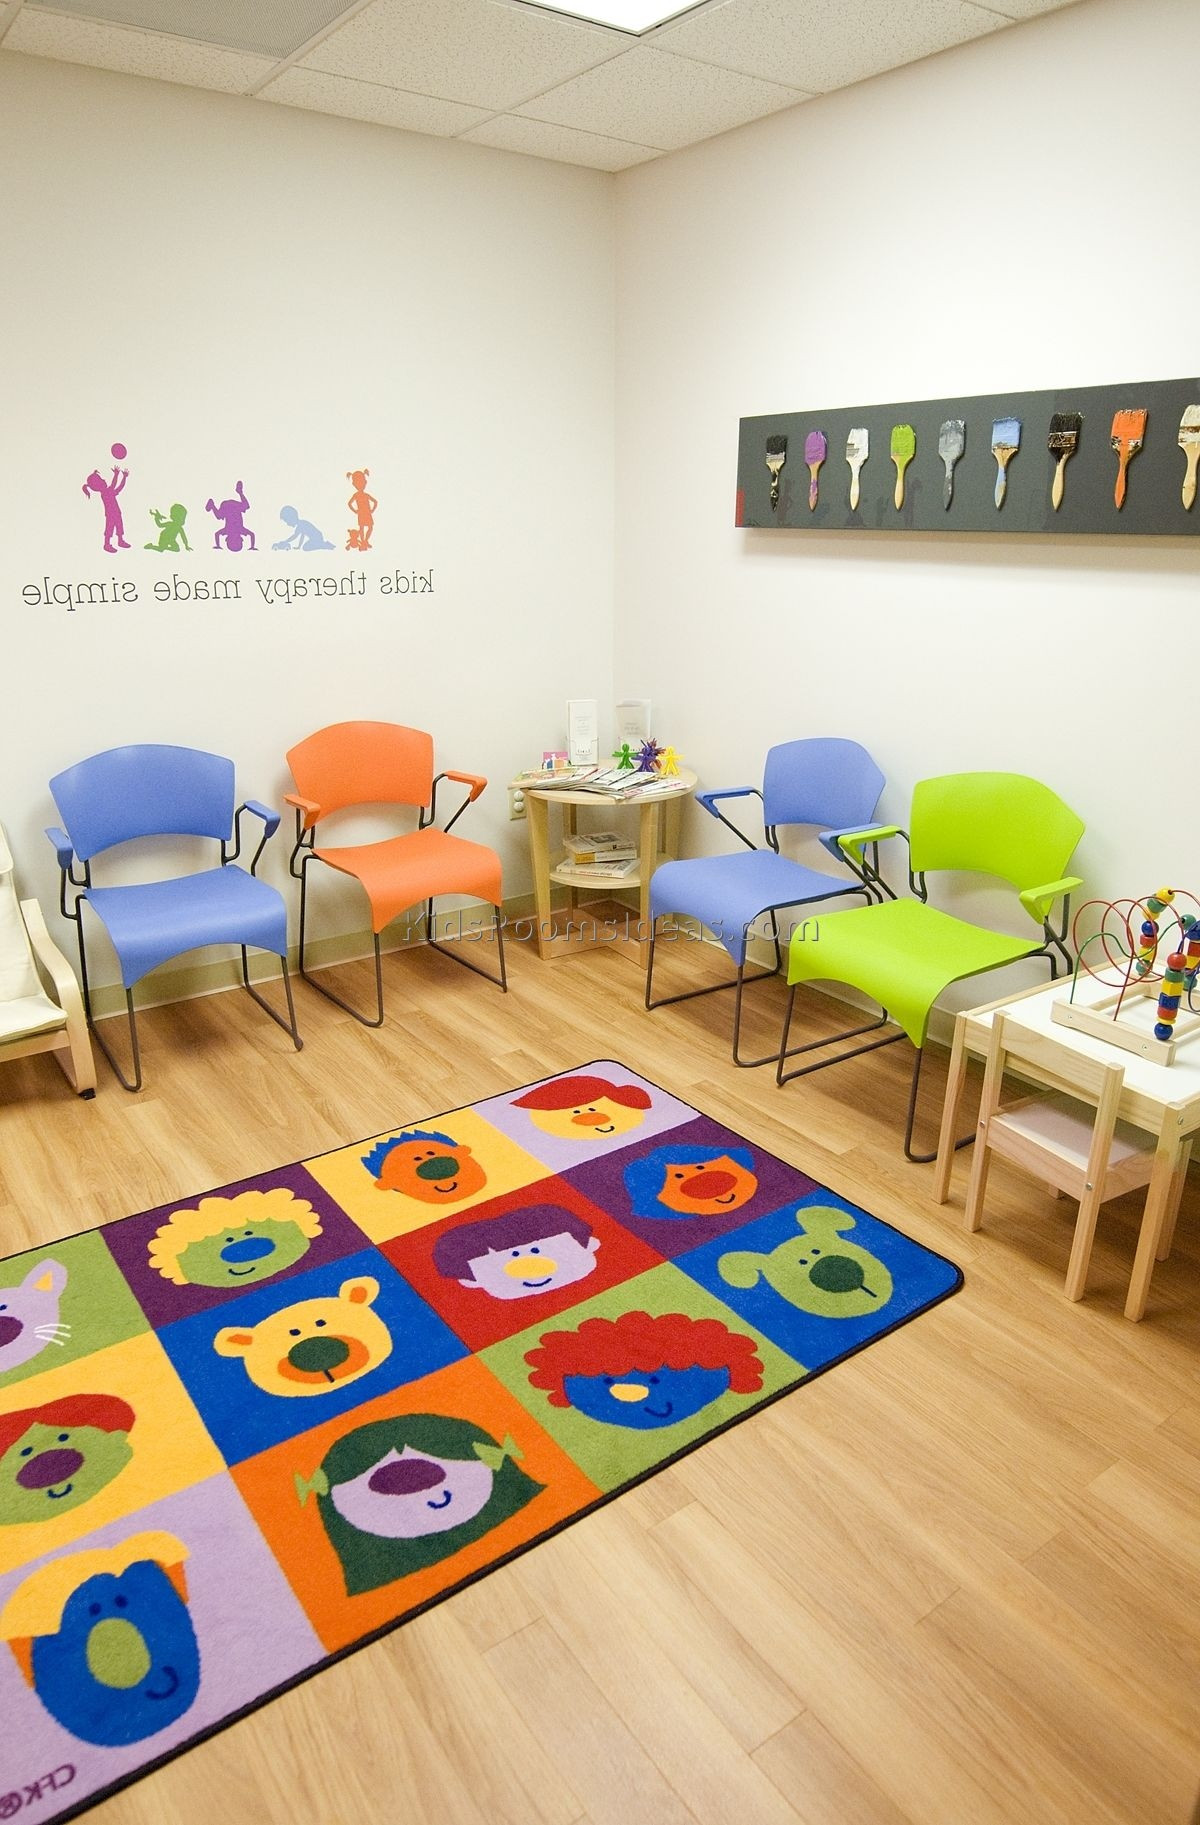 Waiting Room Furniture For Kids
 Childrens Waiting Room Furniture Kids Toys And fice